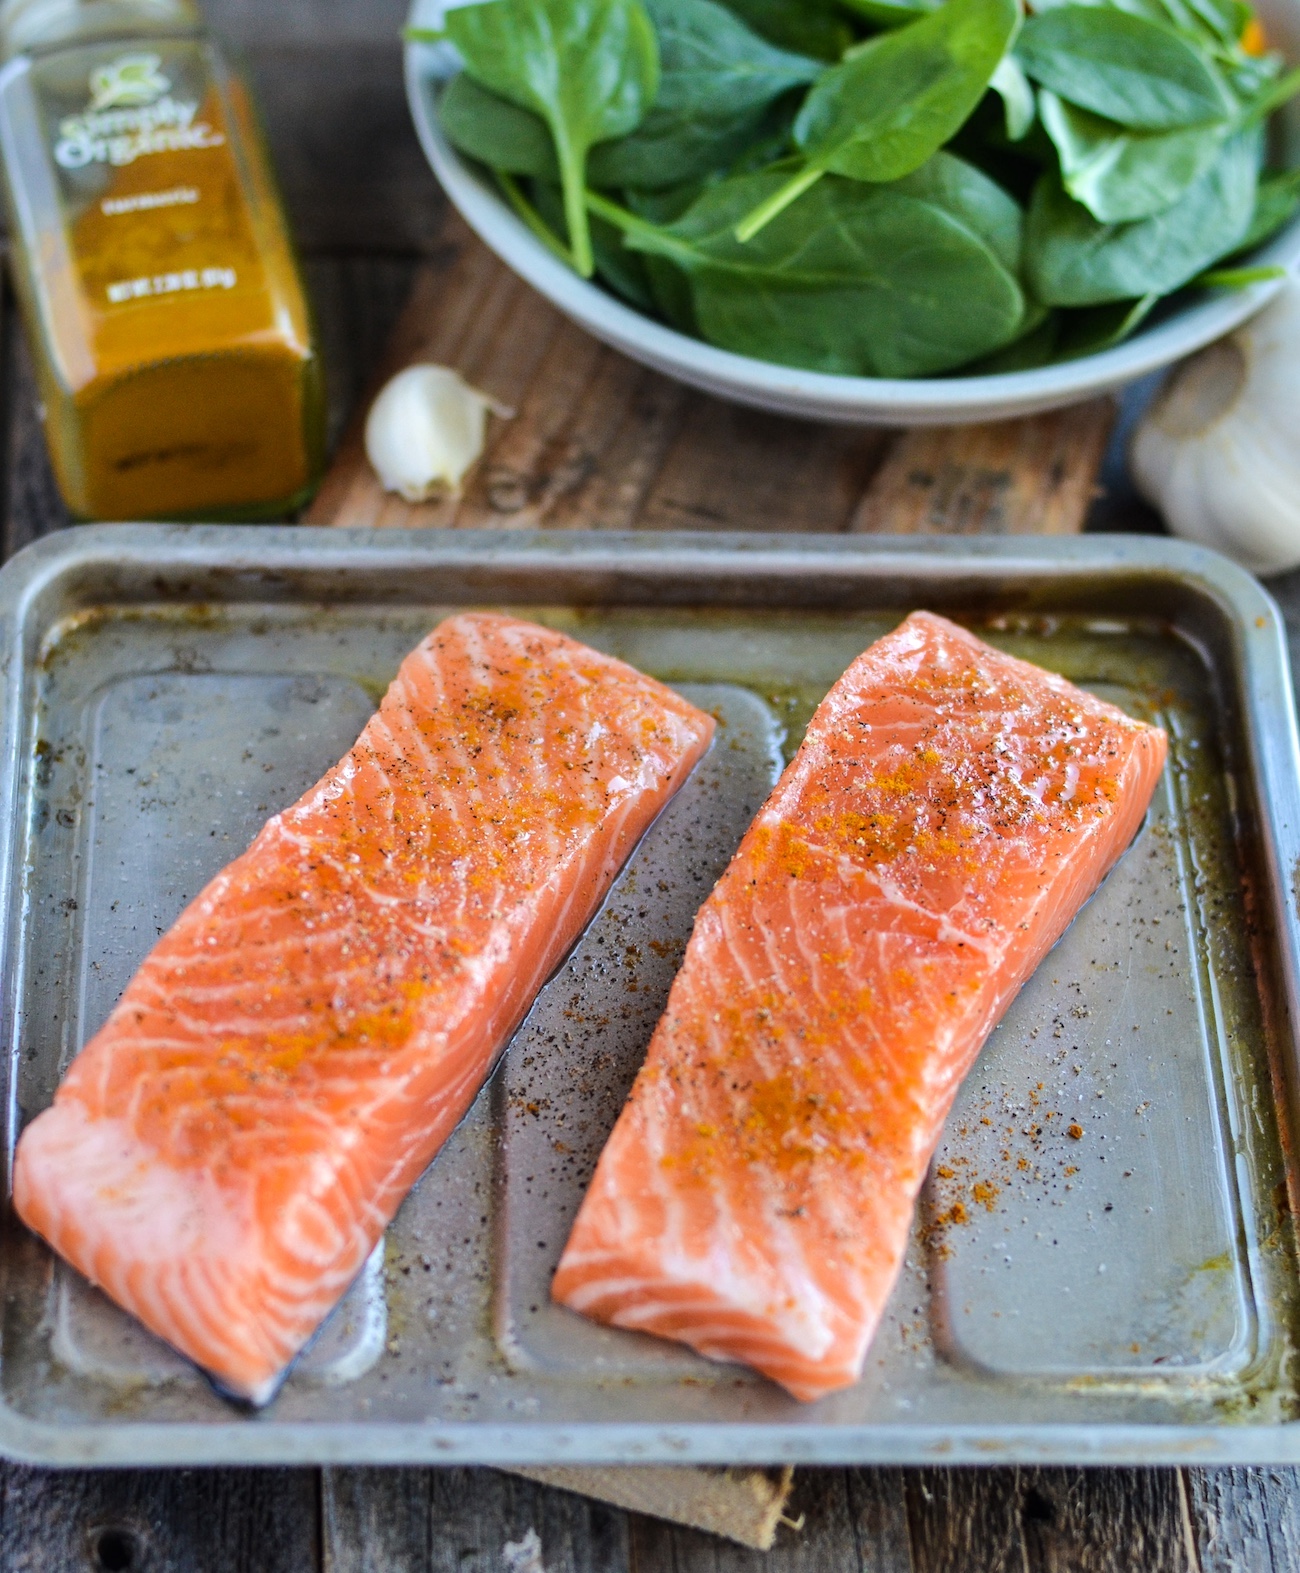 Two raw pieces of salmon seasoned on a baking pan